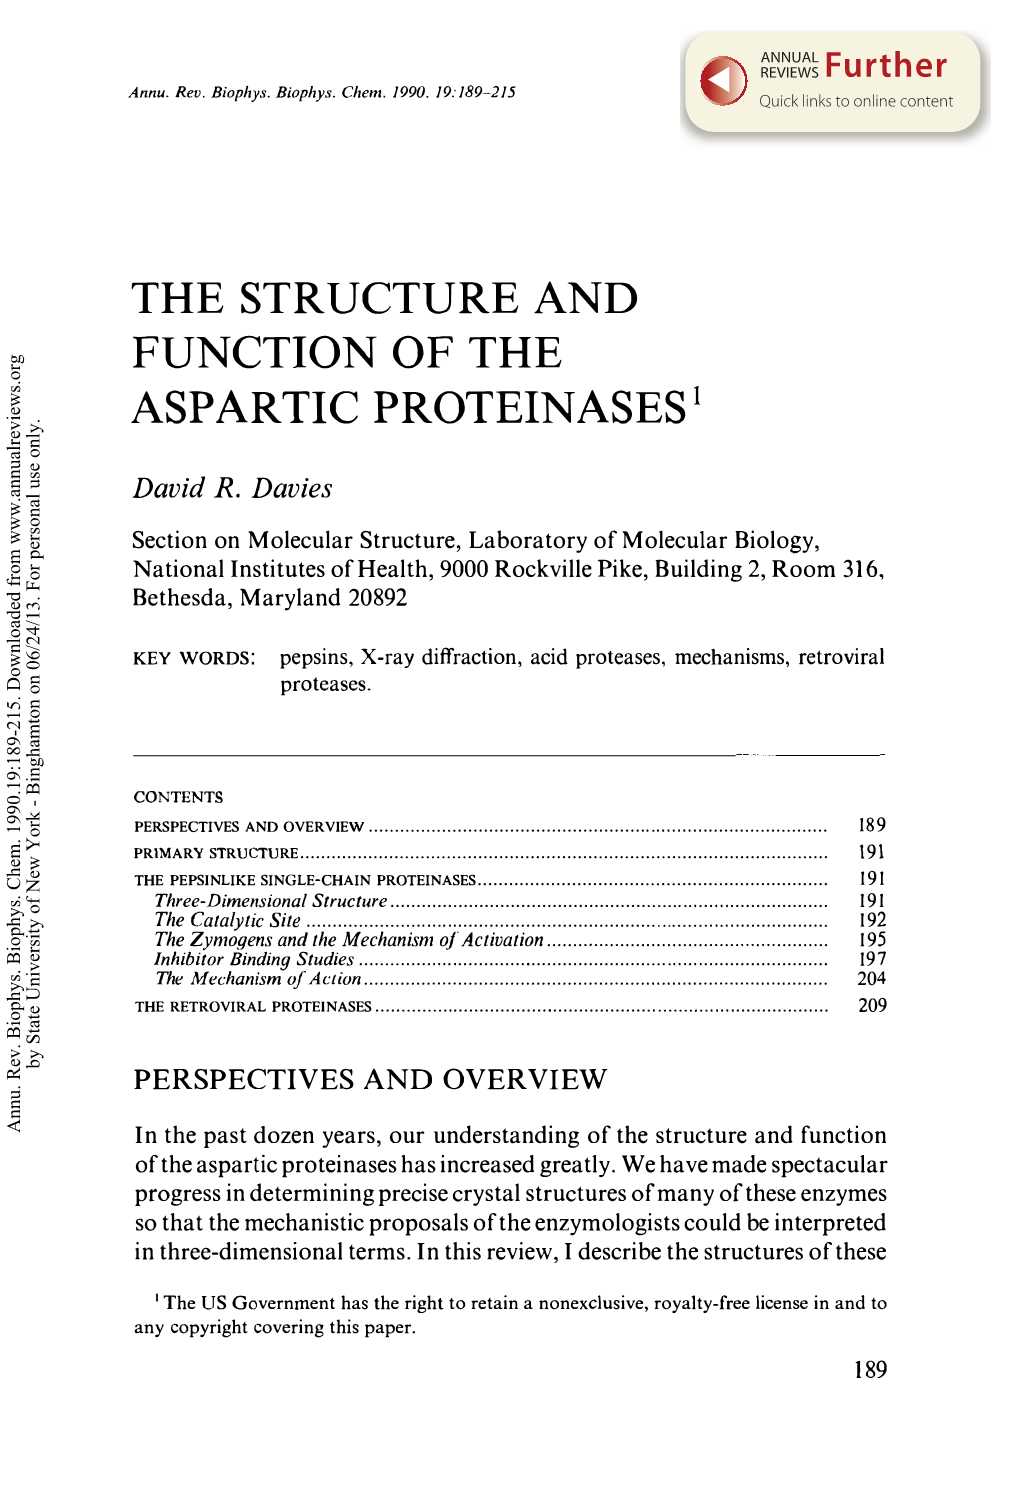 The Structure and Function of the Aspartic Proteinases1